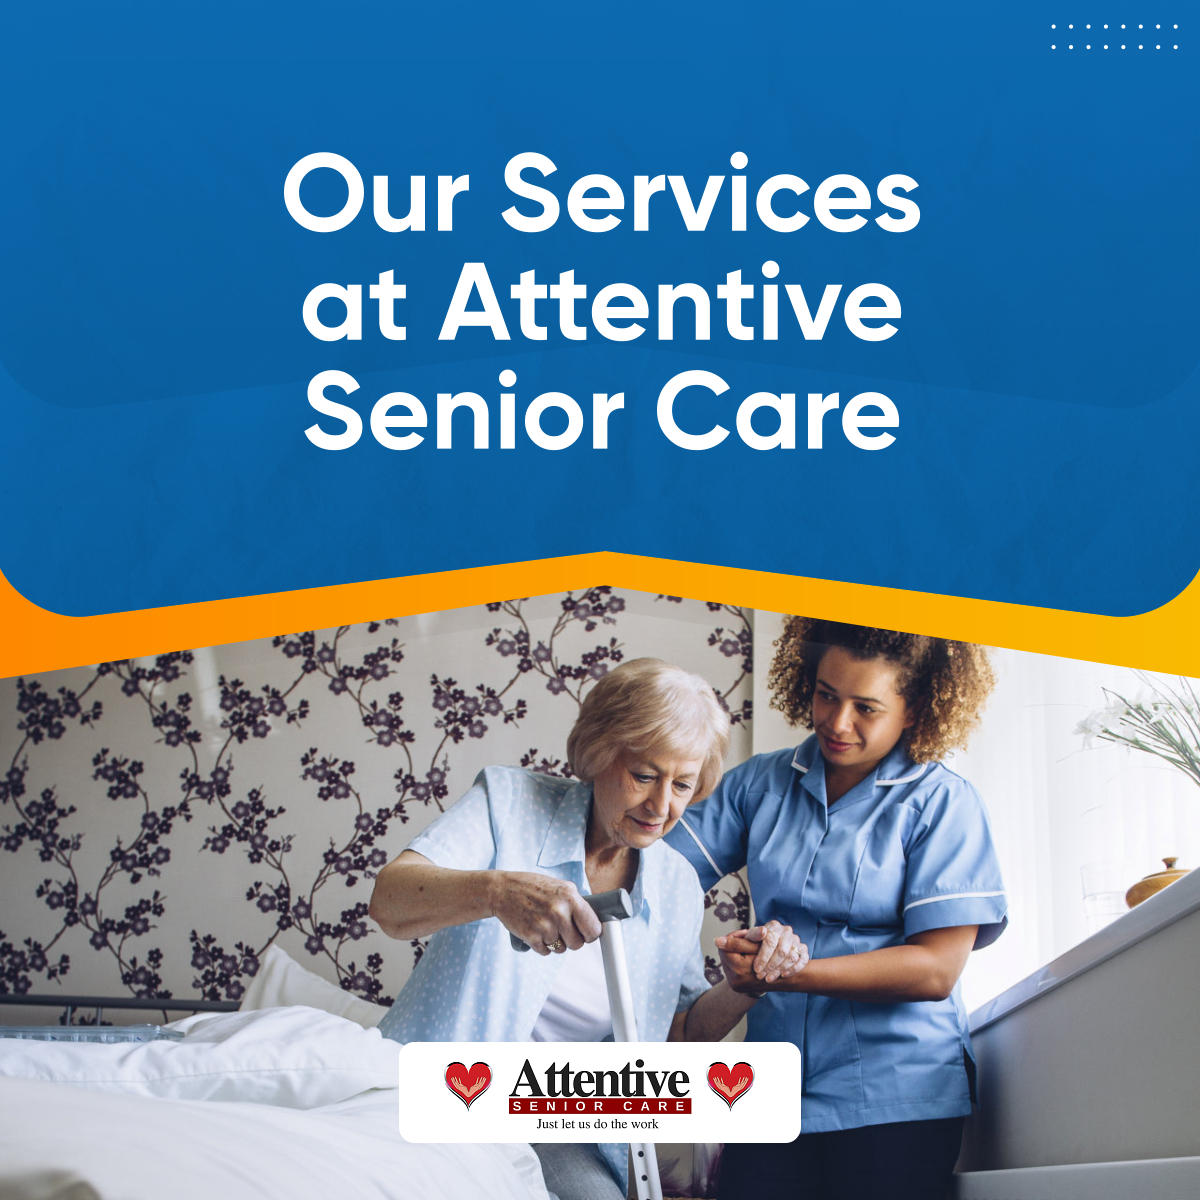 At Attentive Senior Care, our mission is to deliver the most excellent level of care in a warm and caring environment. Read more: facebook.com/permalink.php?… #FresnoCA #OurServices